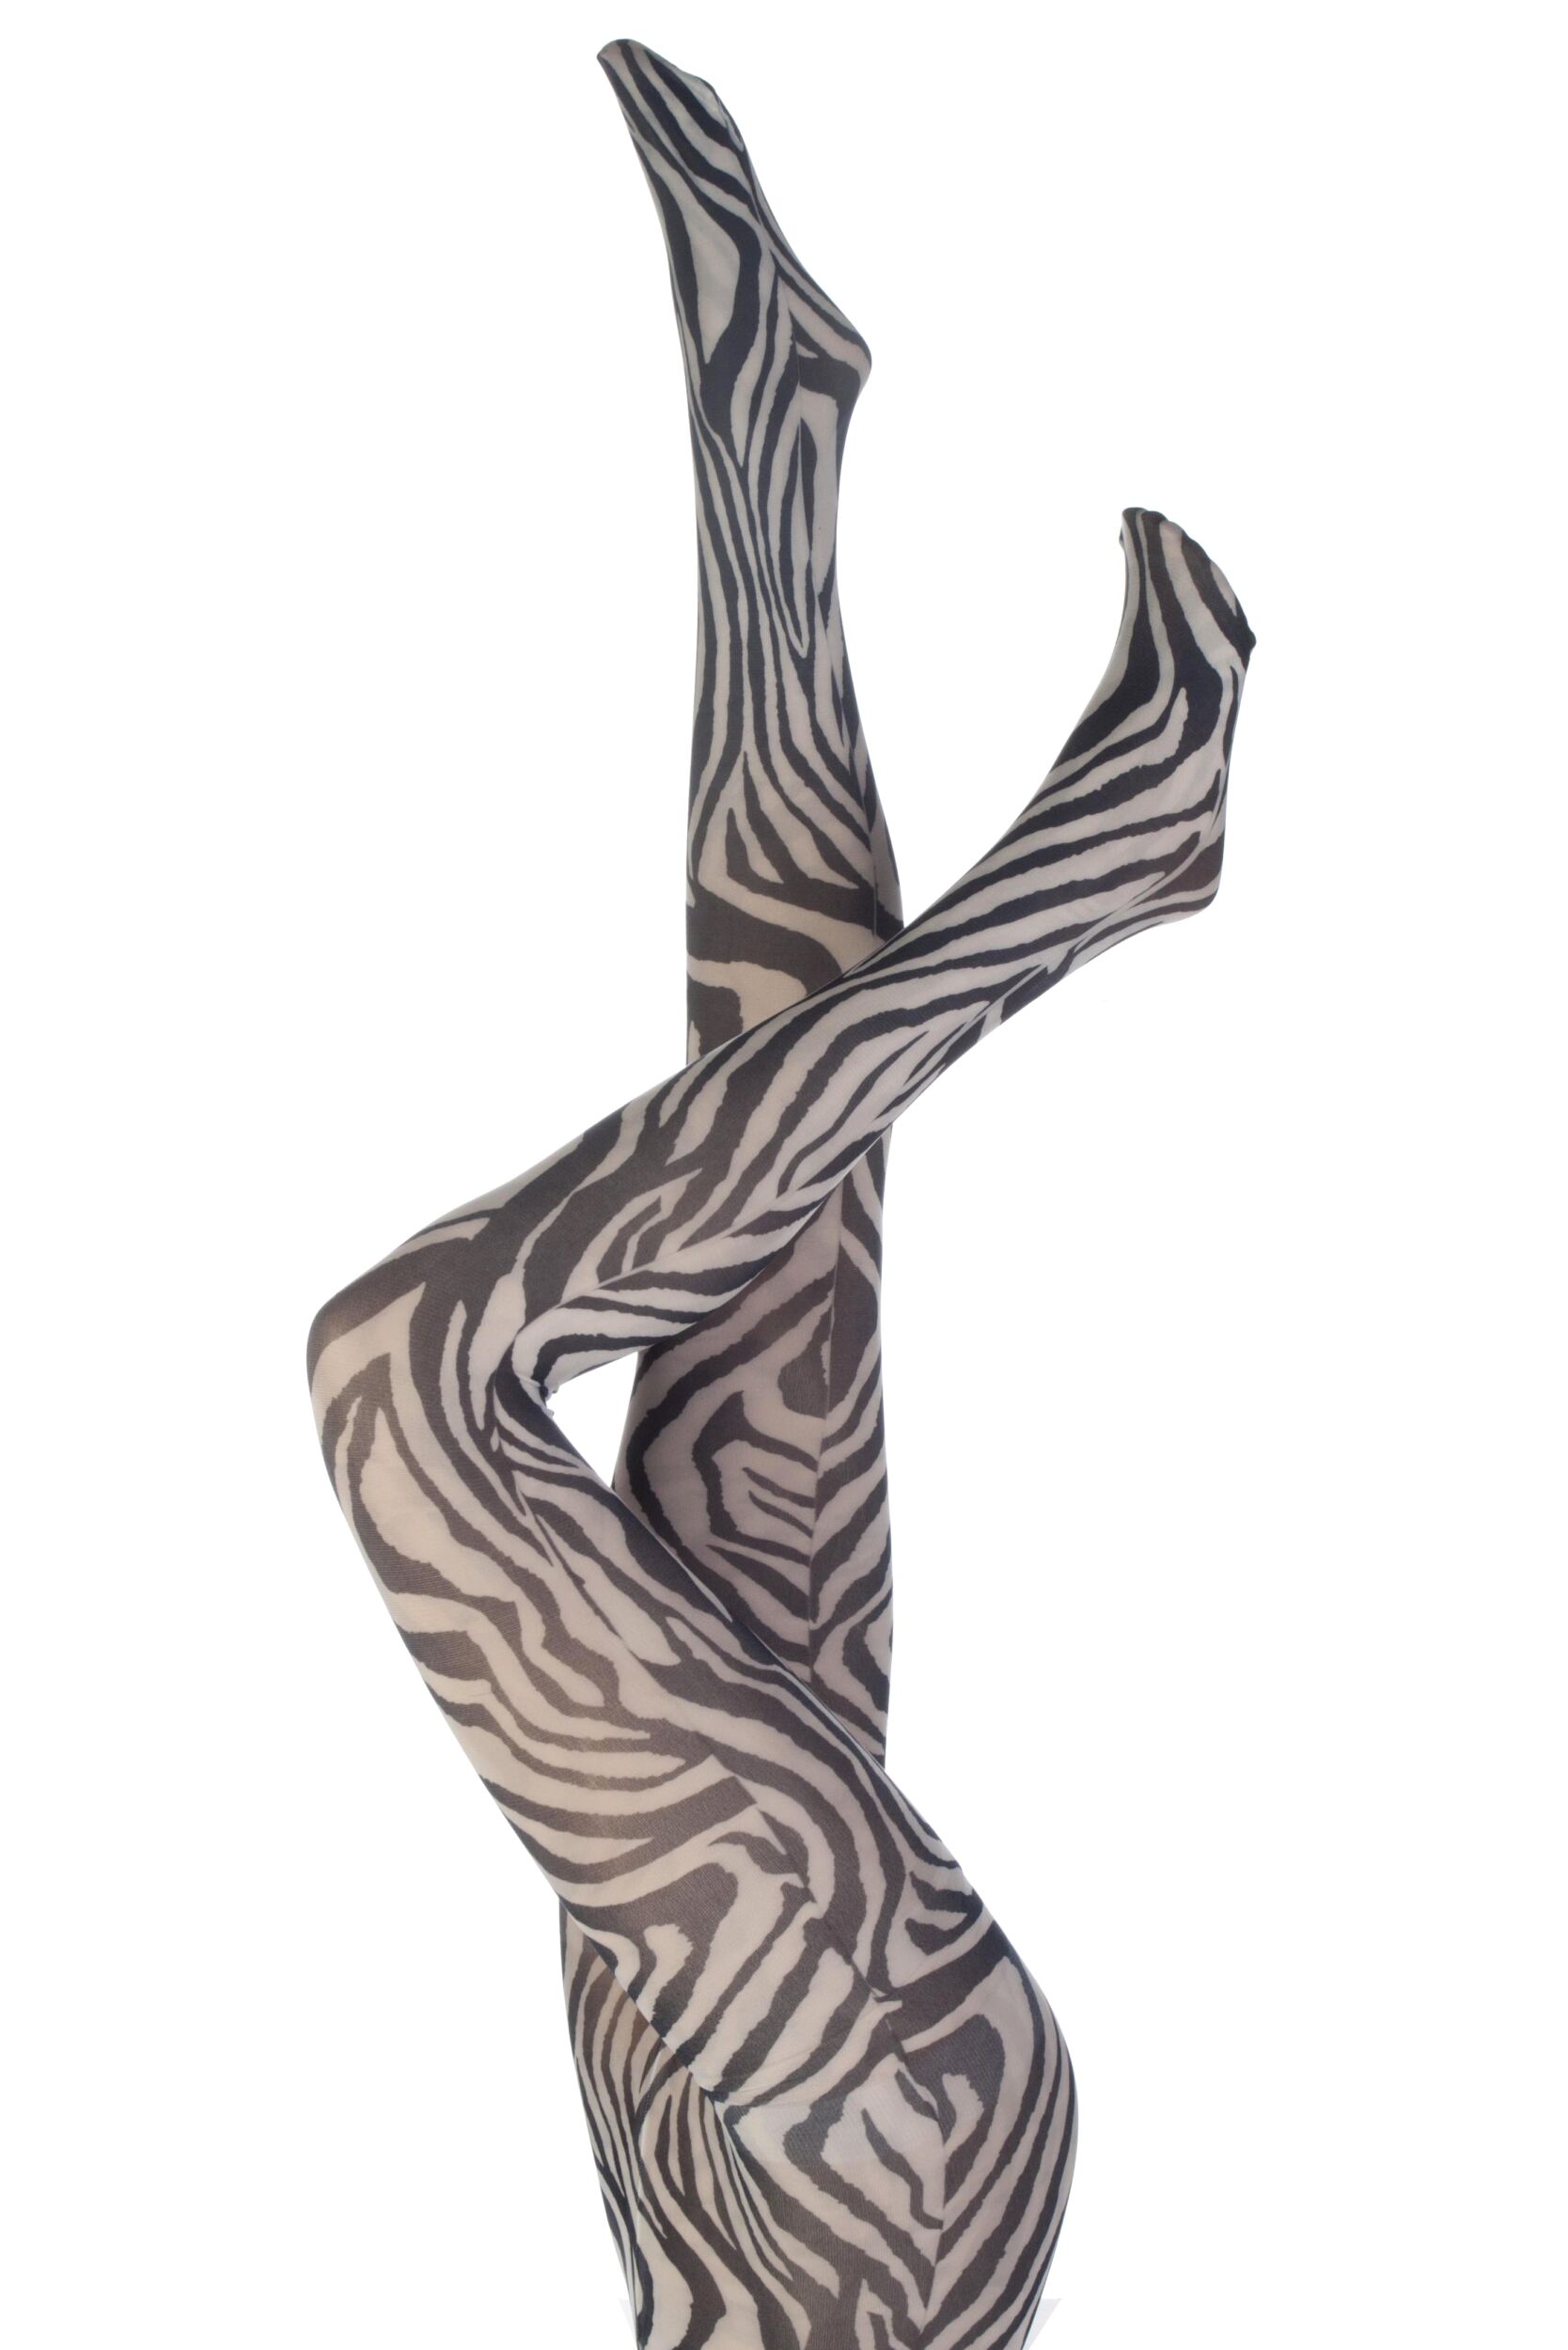 Image of Ladies 1 Pair Silky Signature Zebra Animal Print Tights In Black and White